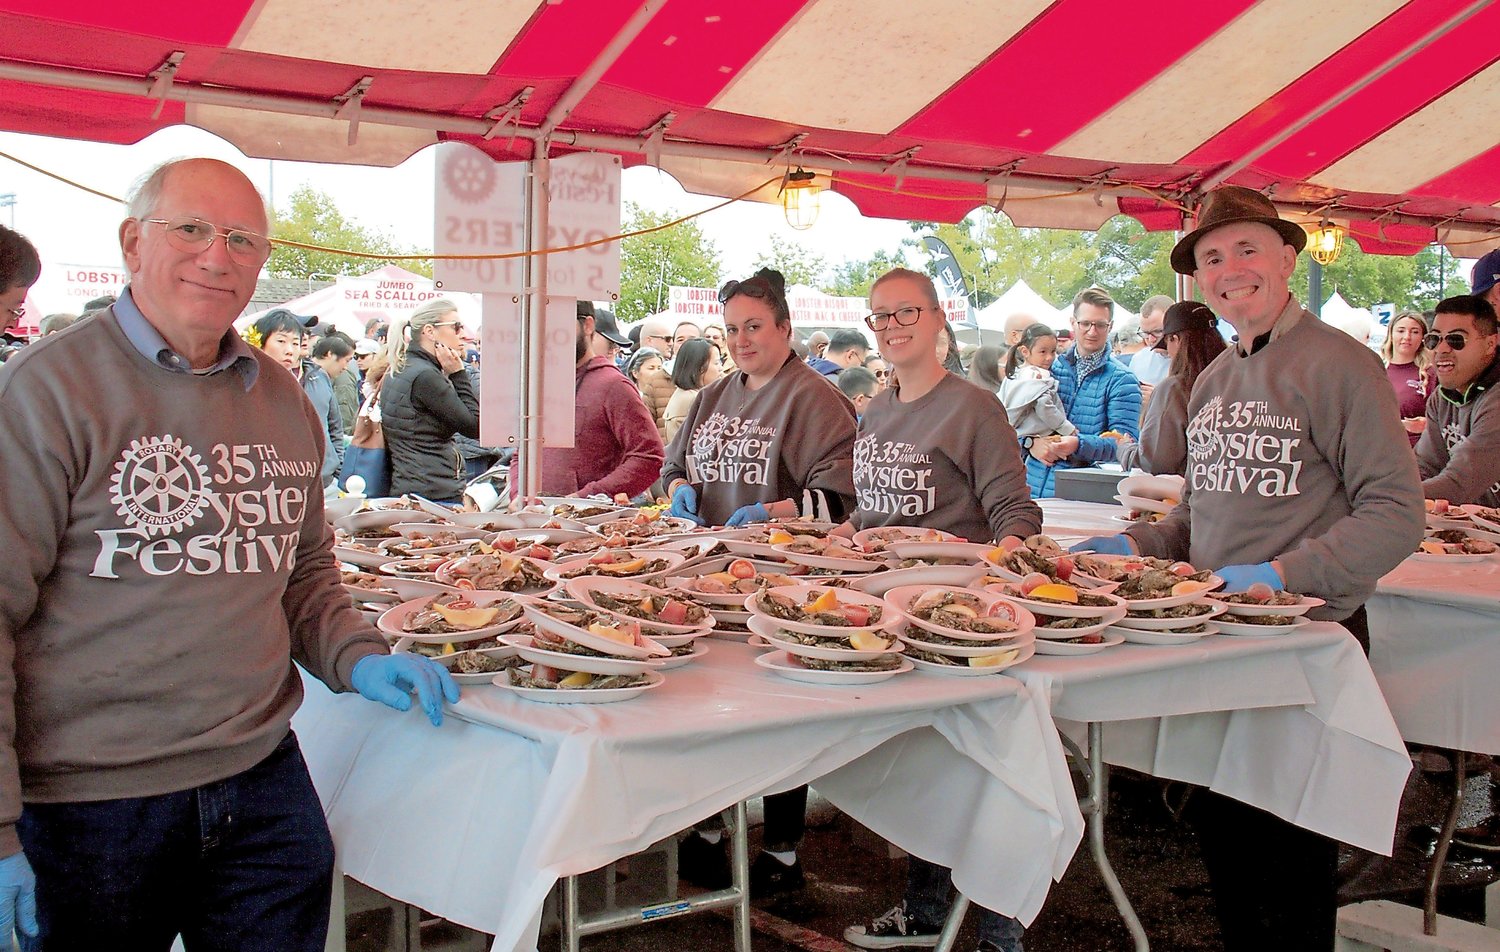 Plates of oyster were prepared and stacked in 2018, ready to sell to Oyster Bay festival goers. Oysters and clams will be plentiful at this year's Oyster Festival too.